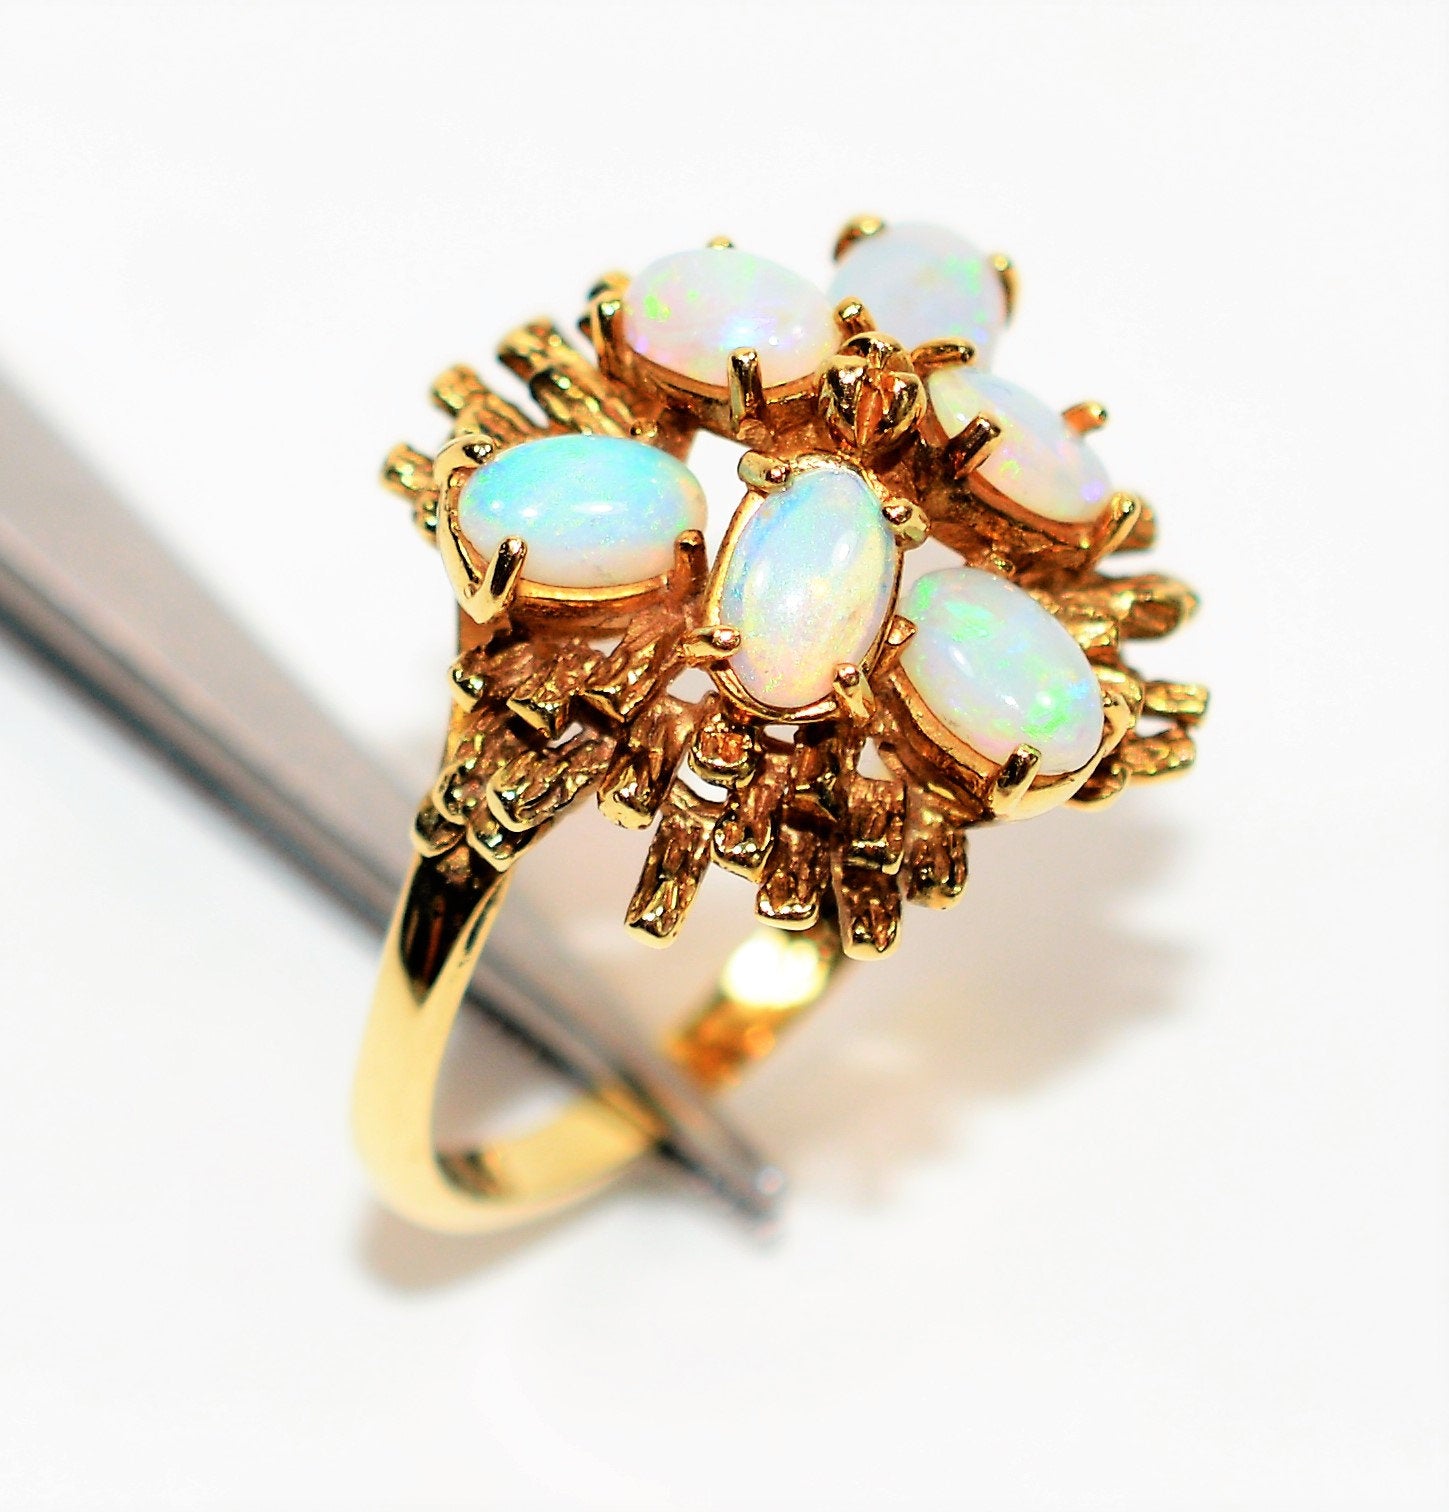 Natural Ethiopian Opal Ring 14K Solid Gold 3tcw Welo Opal Ring Precious Opal Ring Cluster Ring Women’s Ring Birthstone Ring Vintage Ring